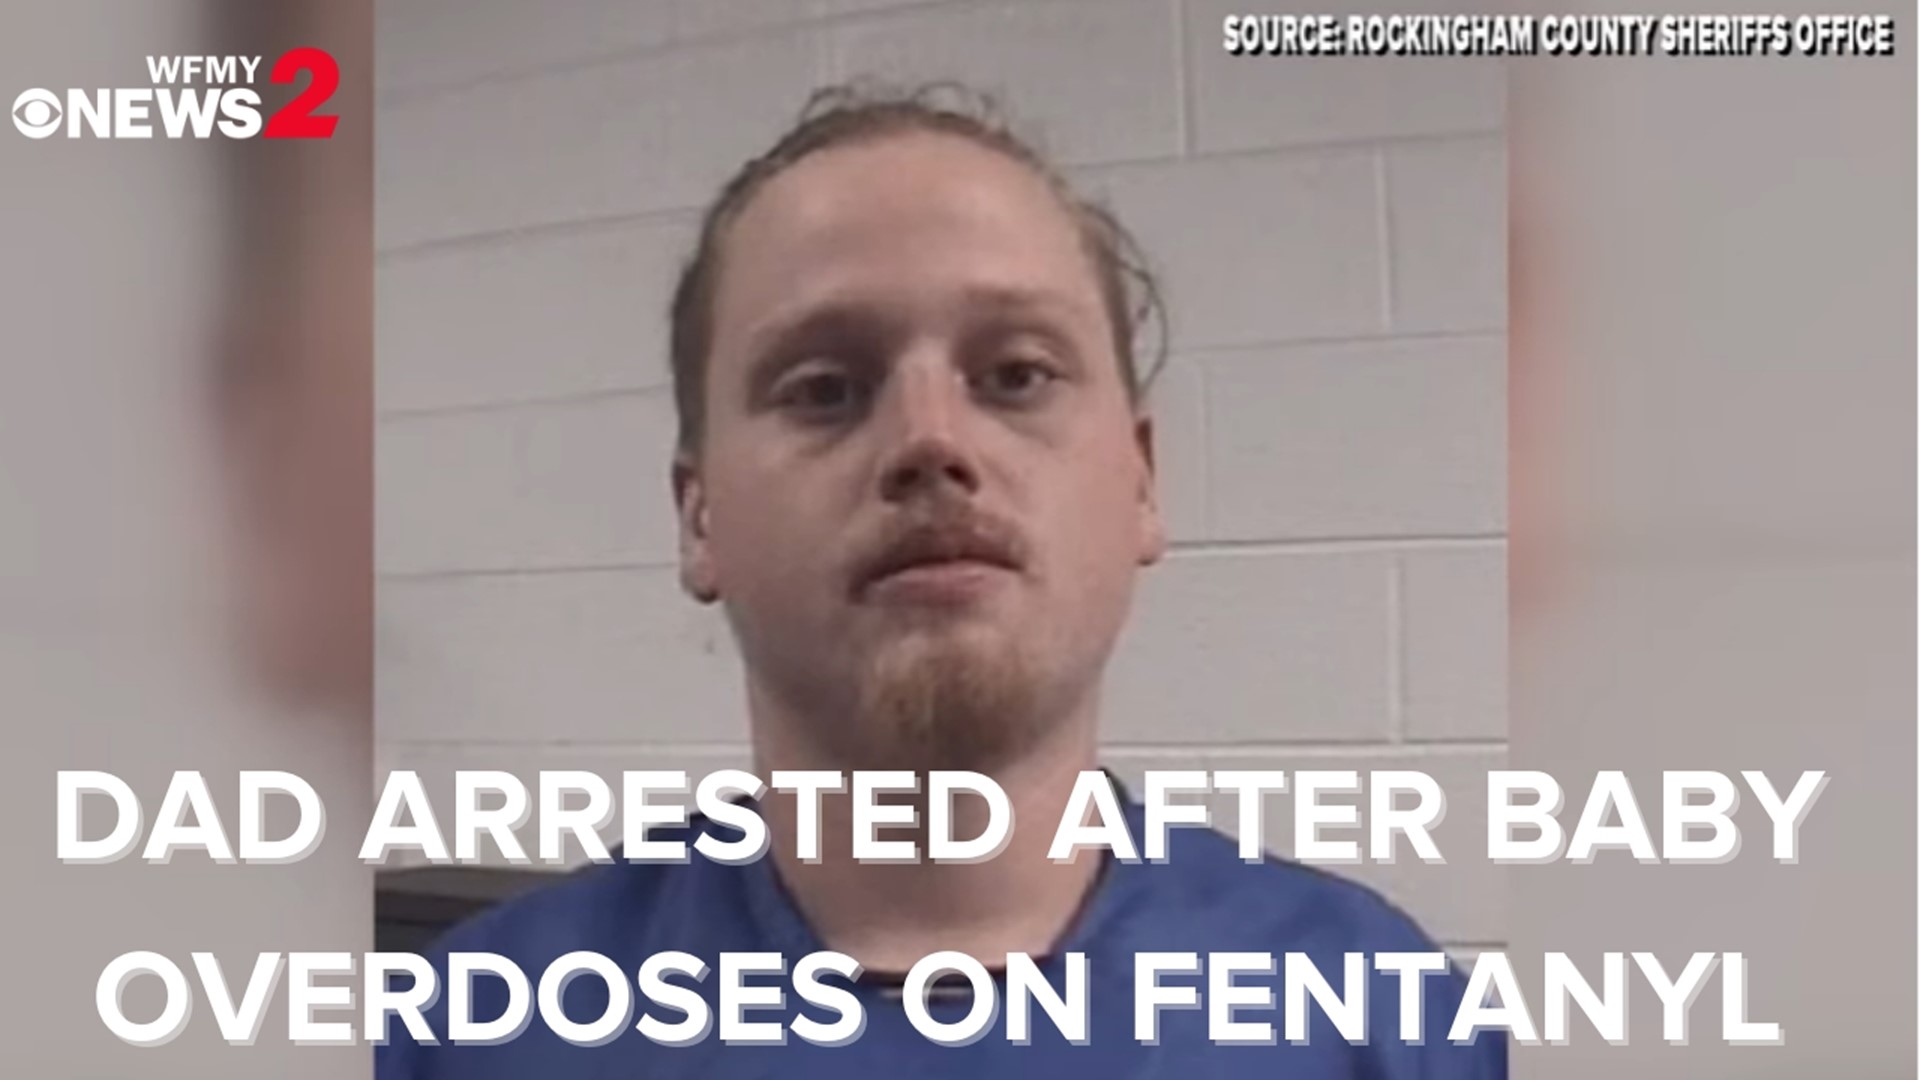 The powerful drug is often responsible for deadly overdoses, but luckily the one-year-old survived. The father has previous assault charges.